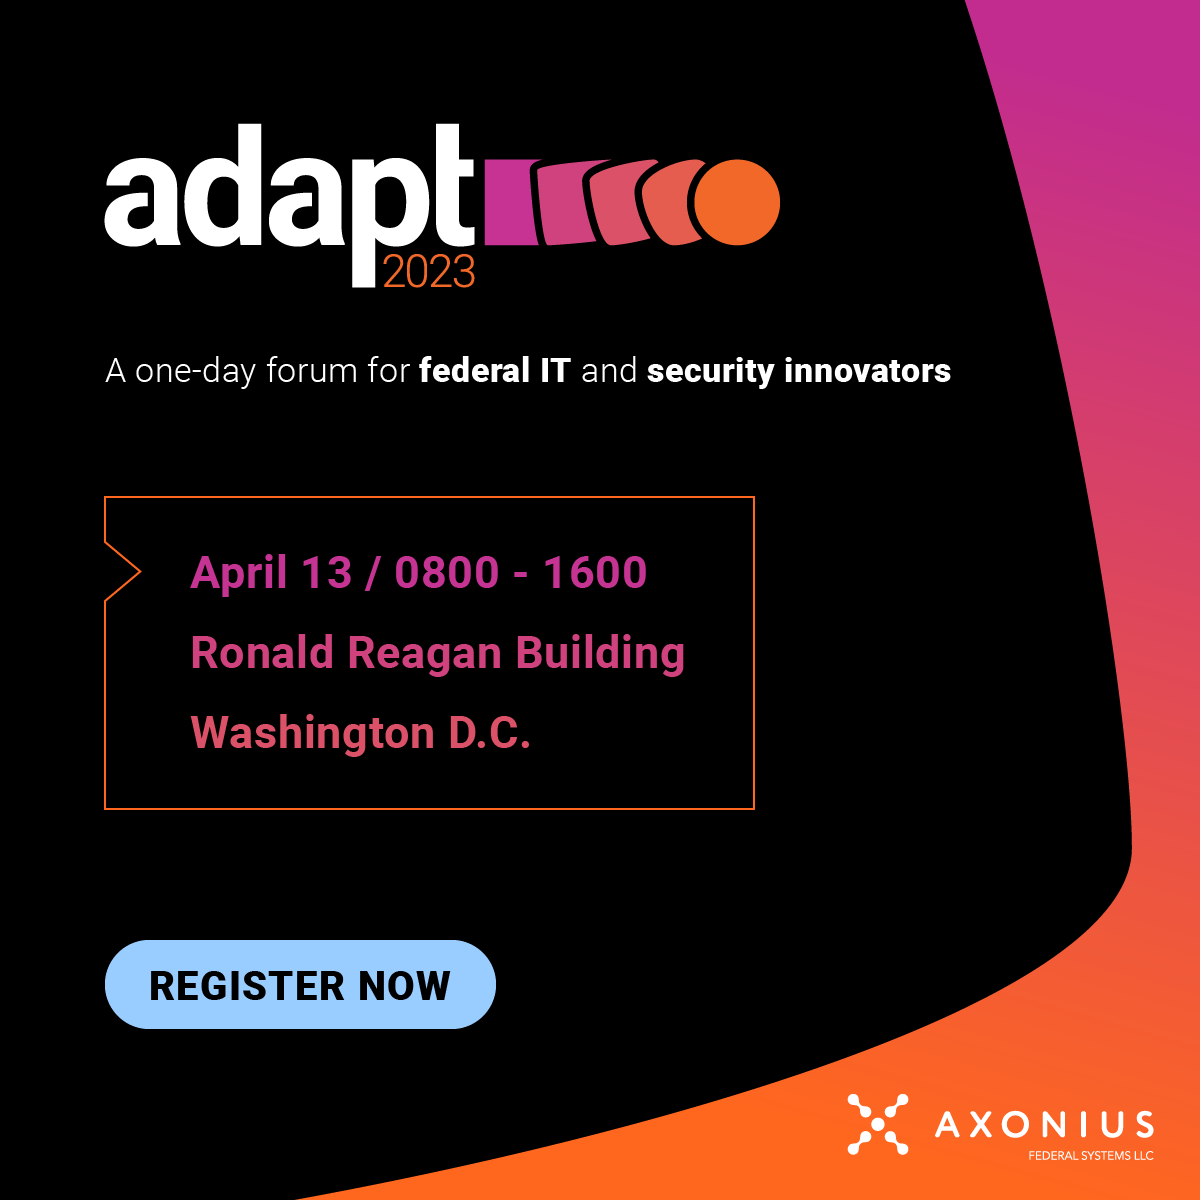 Join us at Adapt 2023: a conference for federal agencies presented by Axonius on April 13 in Washington, D.C. You’ll hear from top innovators from CISA, CMS, and more — plus U.S. gymnastics powerhouse Simone Biles. Sign up now. axoni.us/3JguKZr